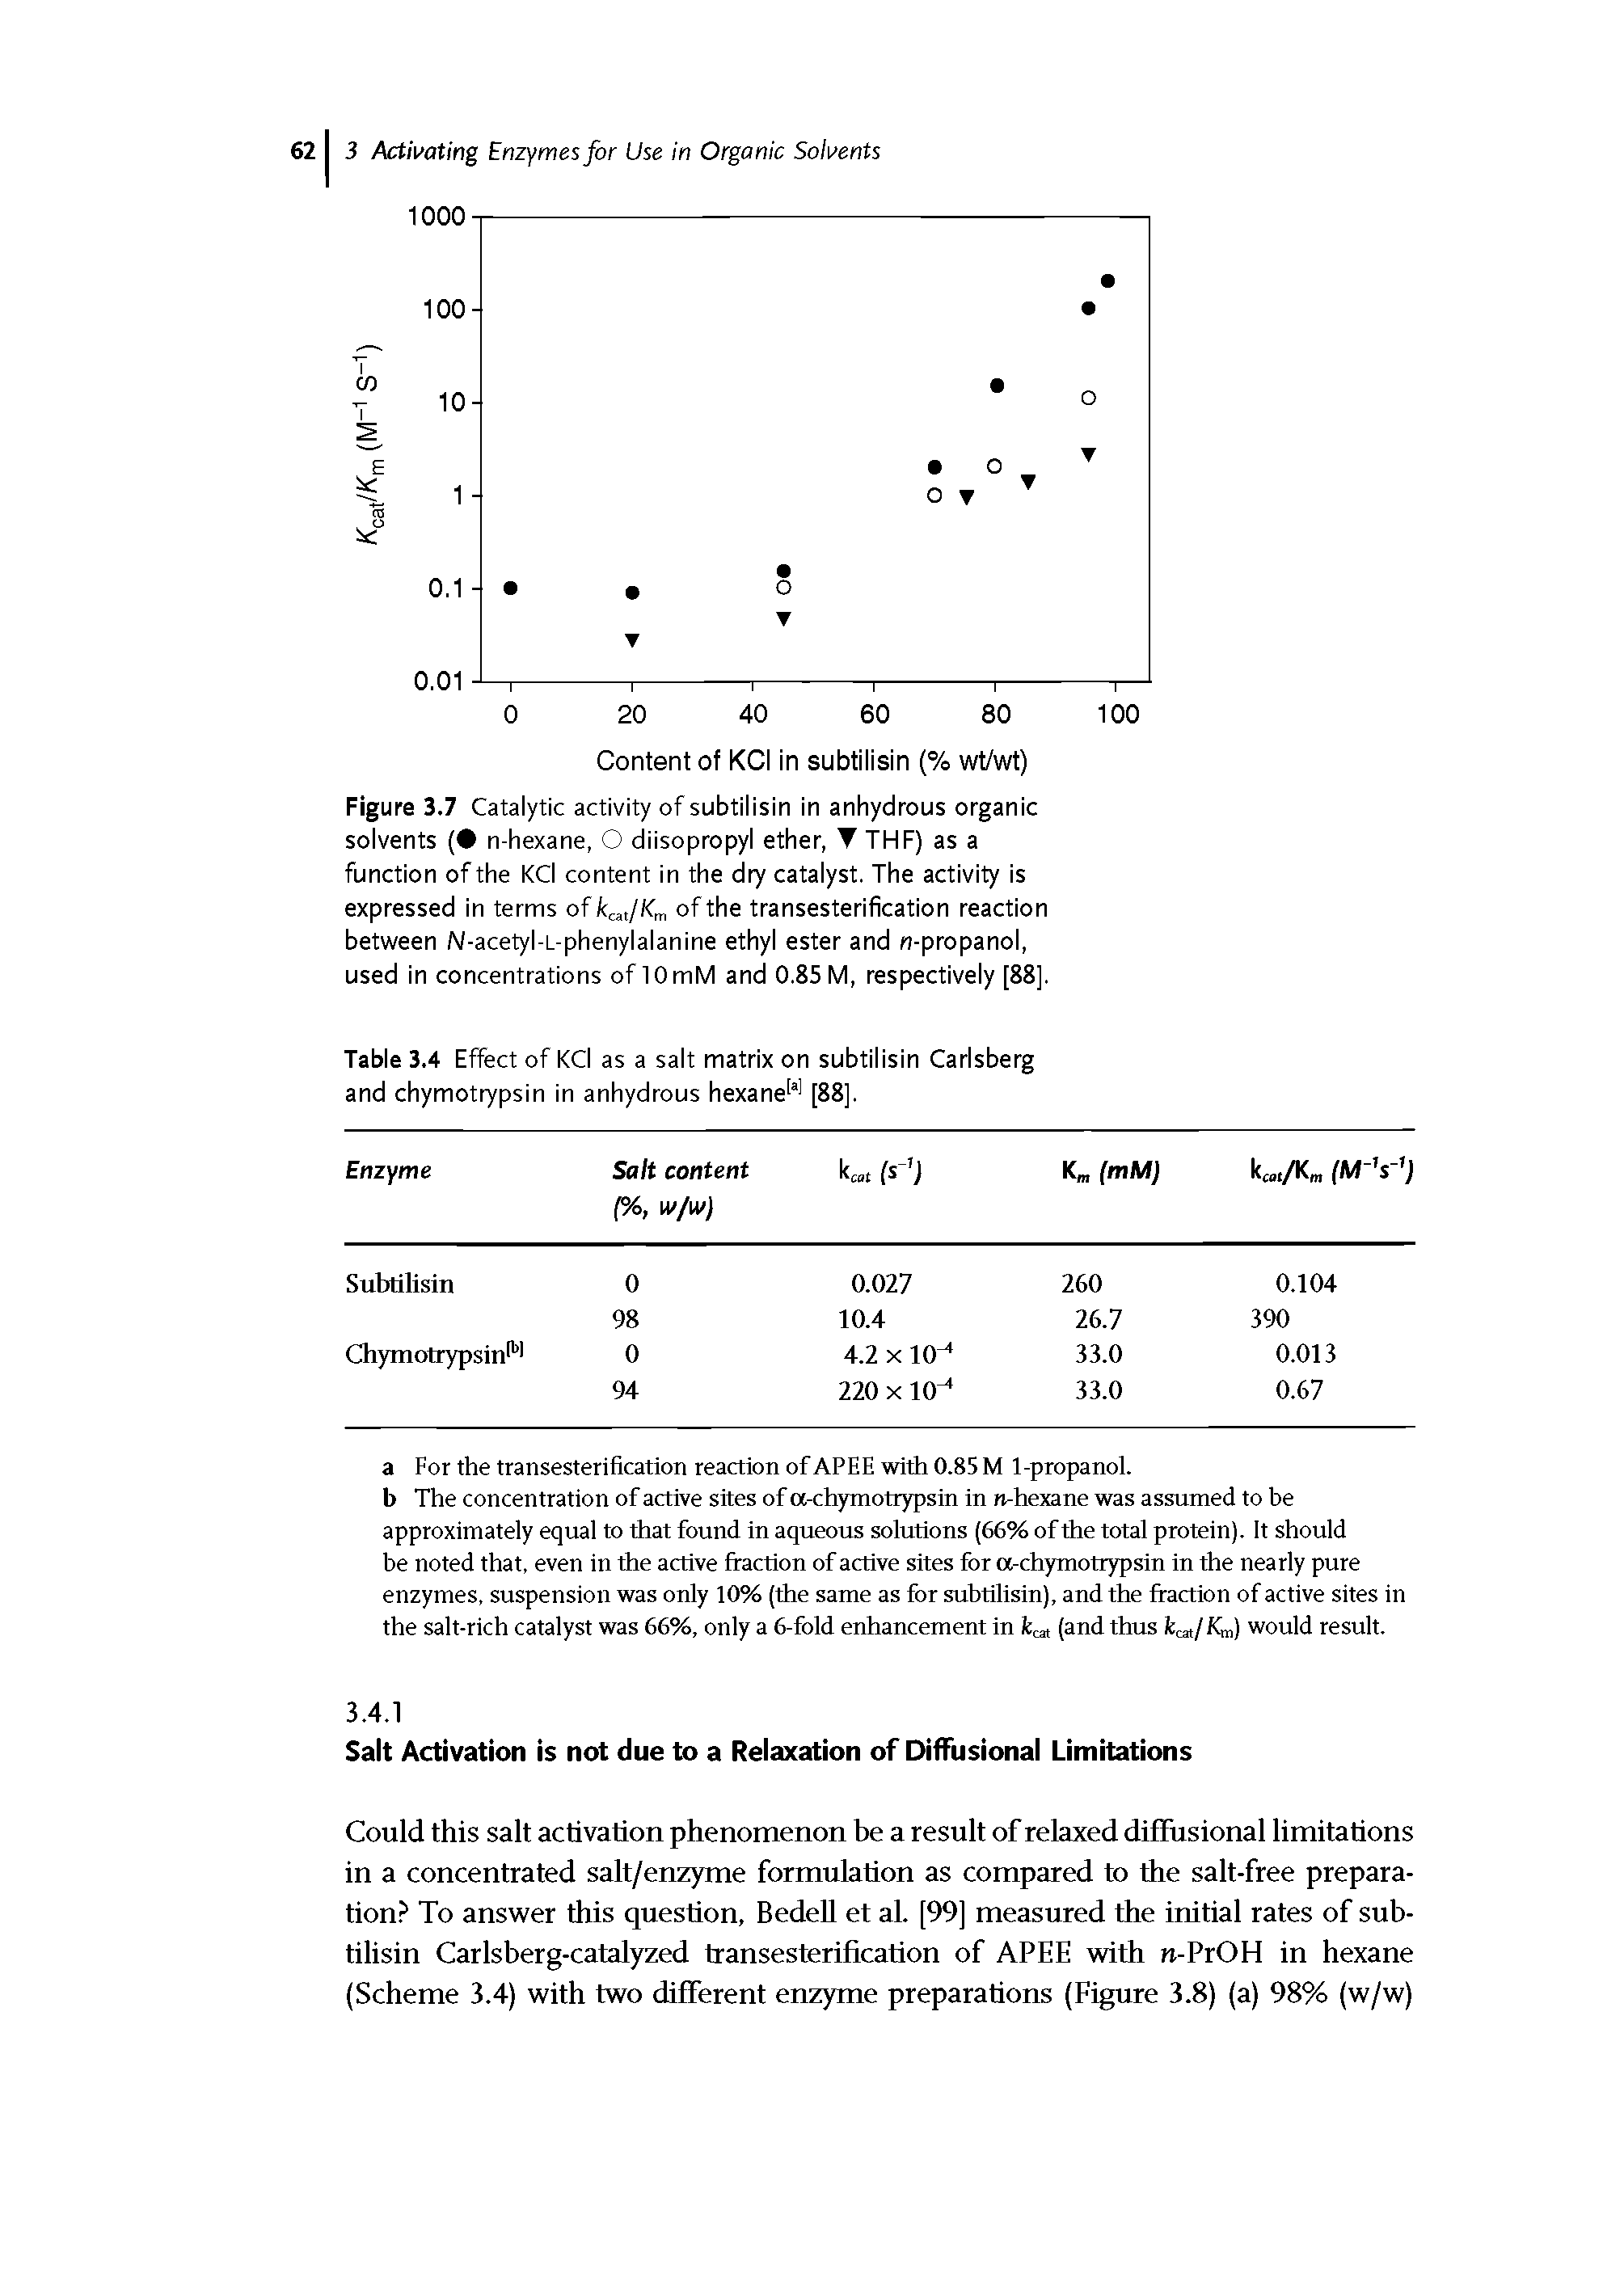 Table 3.4 Effect of KCI as a salt matrix on subtilisin Carlsberg and chymotrypsin in anhydrous hexanew [88].